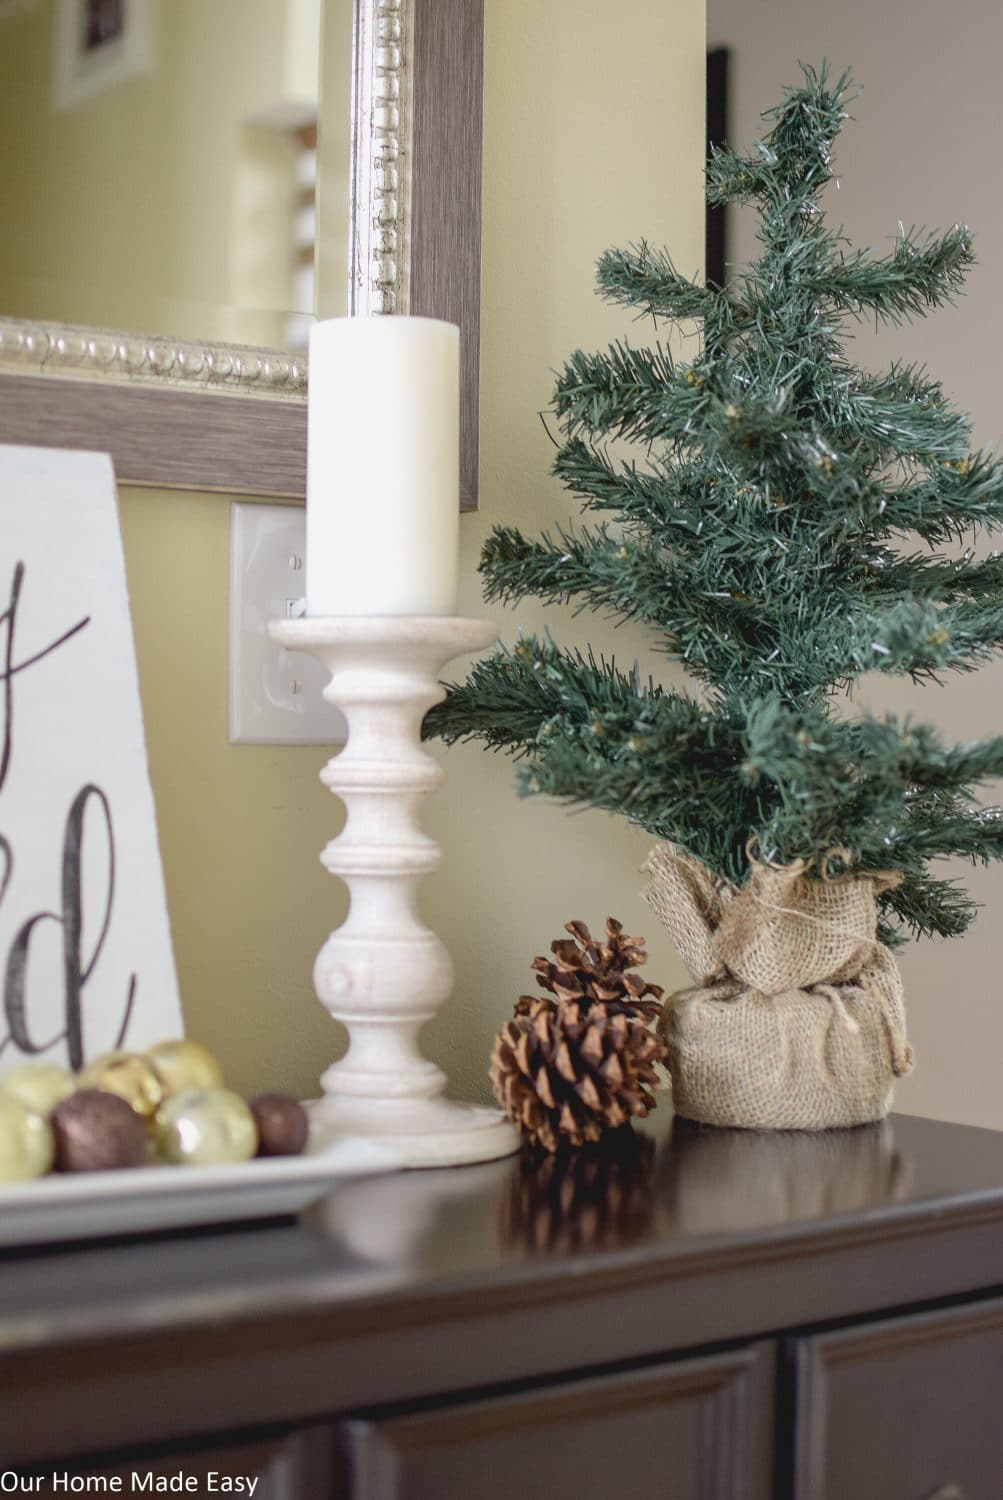 Prepare your home for Christmas decorations with these simple preparation tips